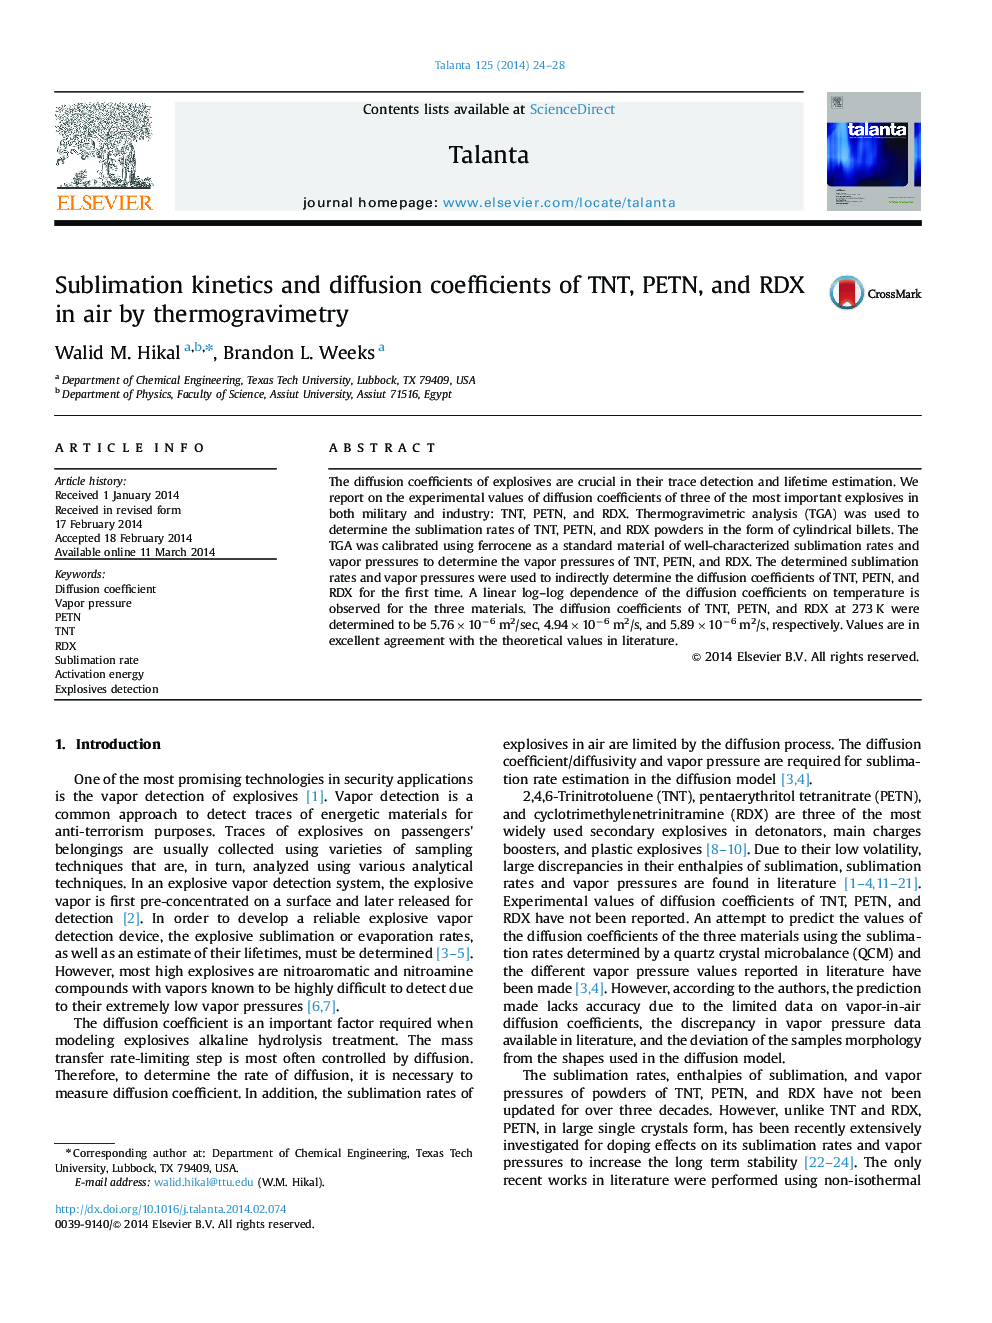 Sublimation kinetics and diffusion coefficients of TNT, PETN, and RDX in air by thermogravimetry